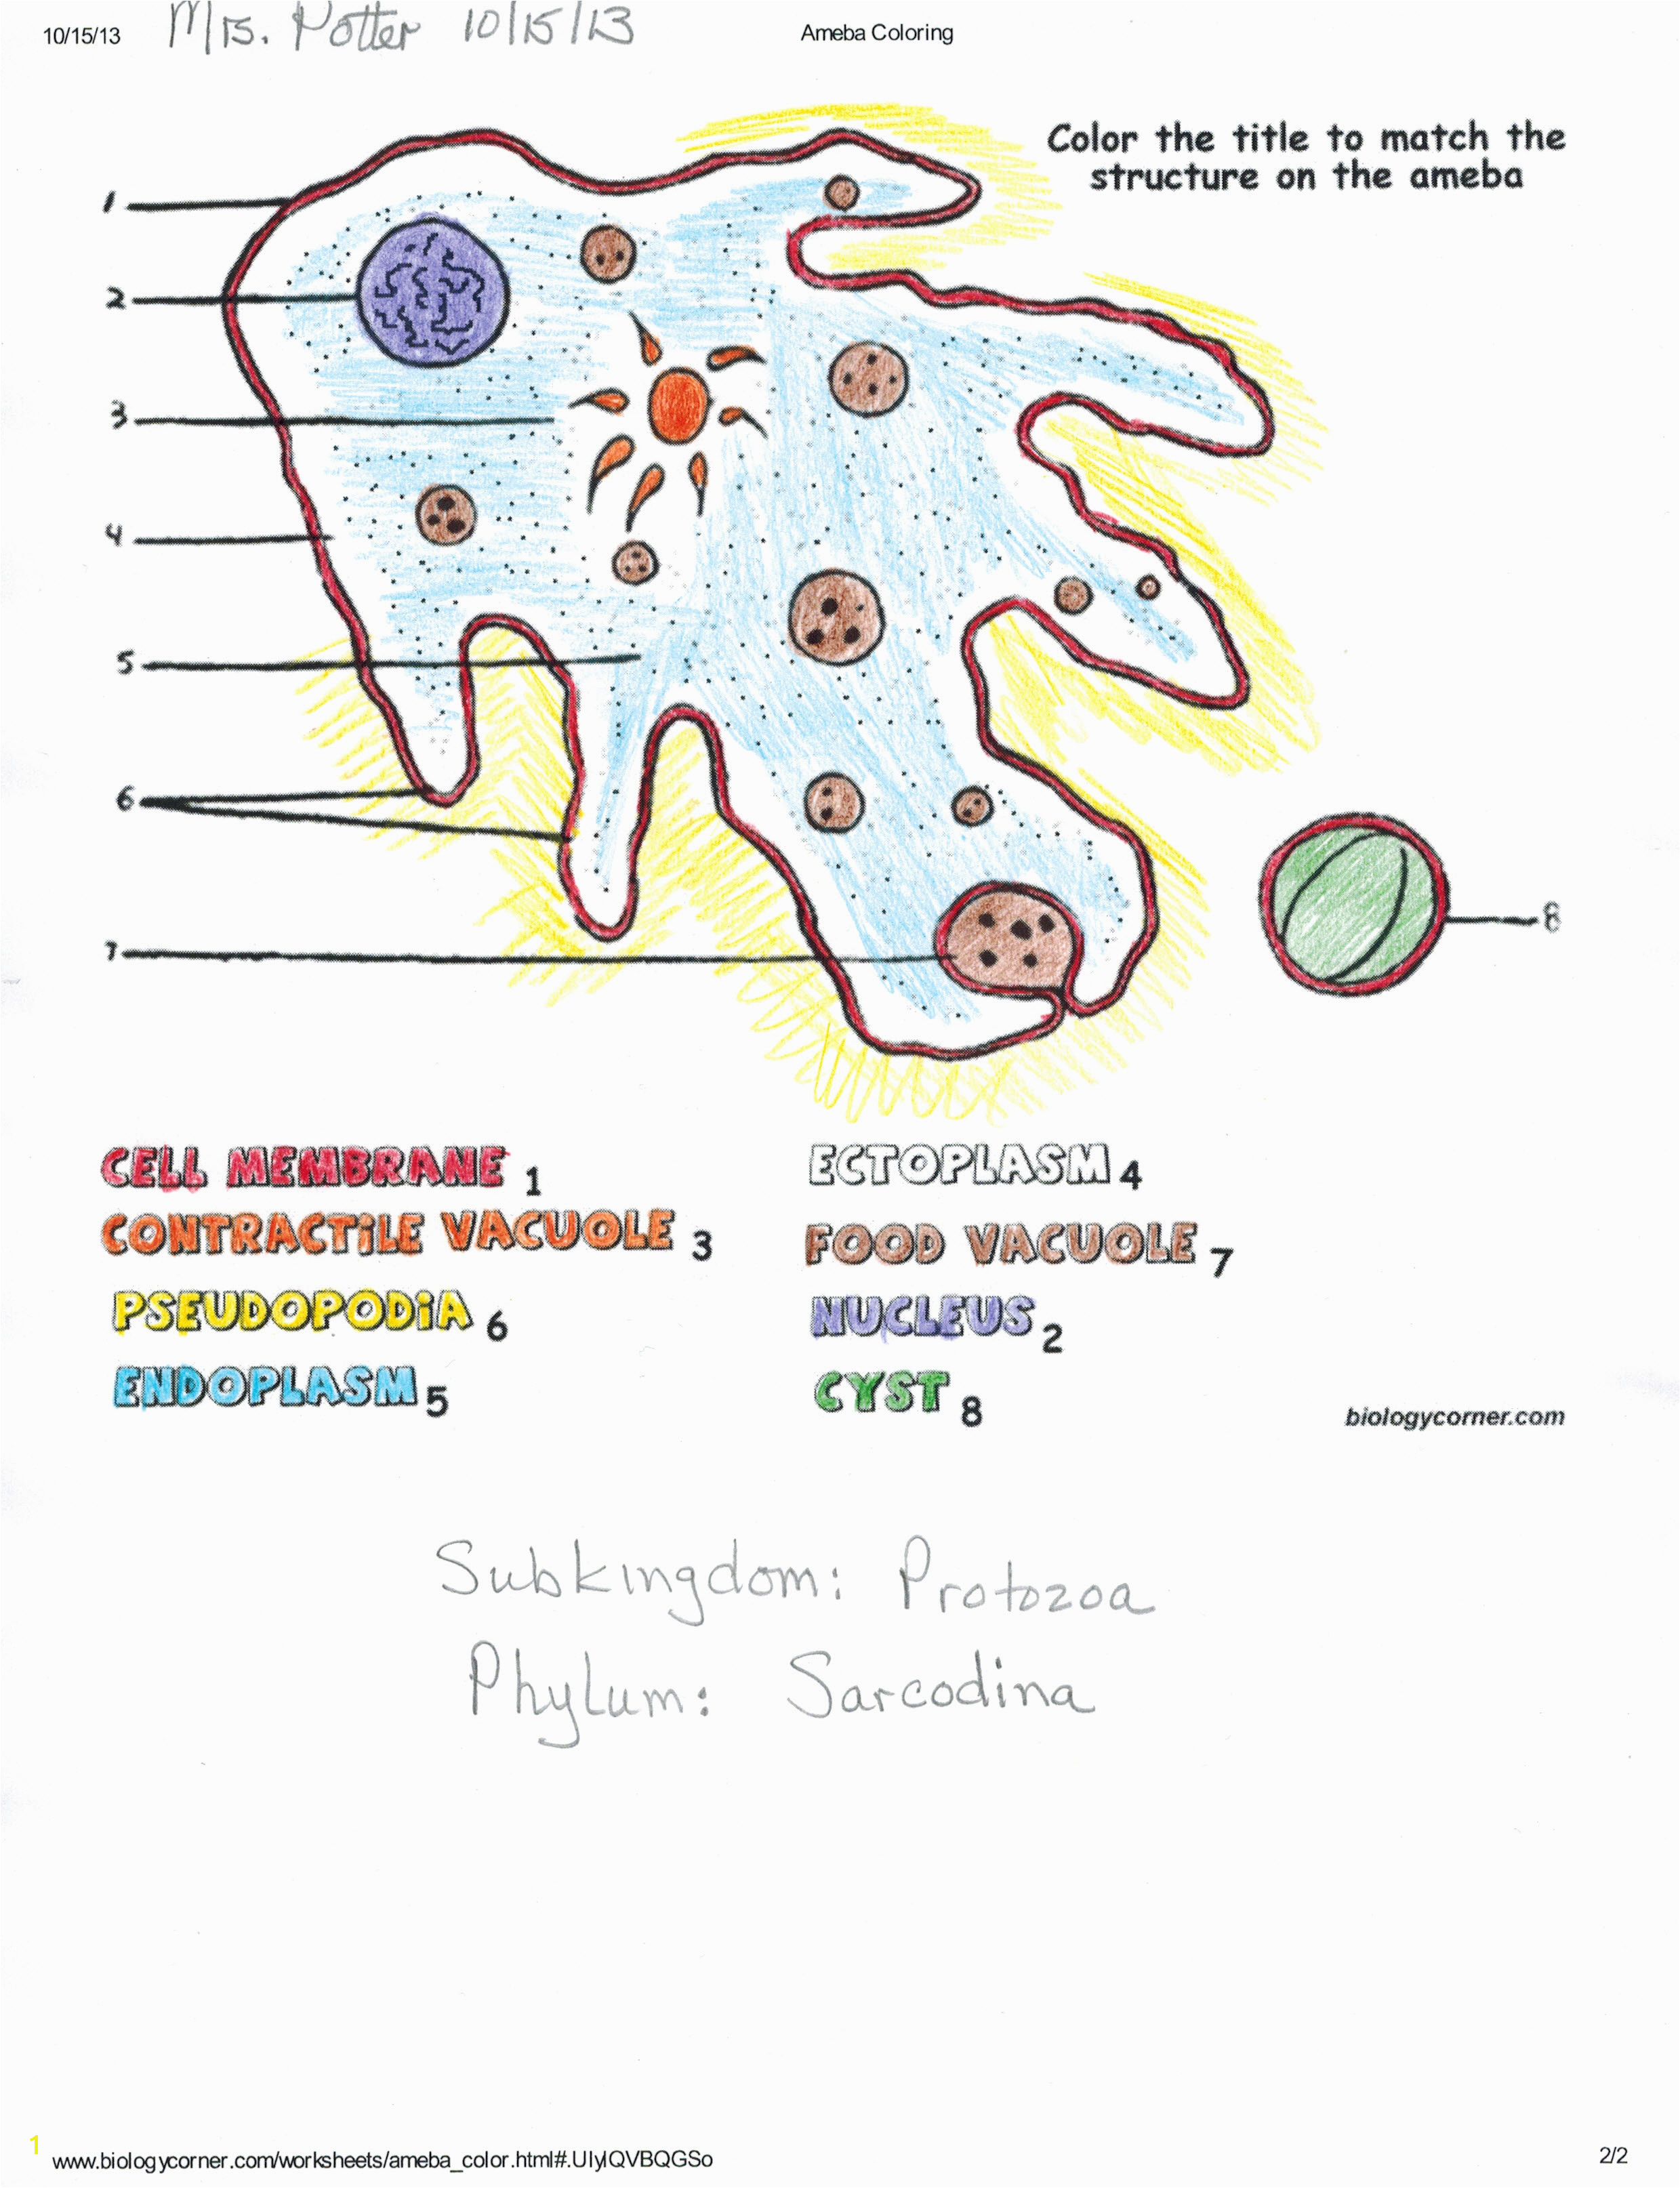 Euglena Coloring Page Promising Euglena Coloring Page Delighted Apol 5320 Unknown